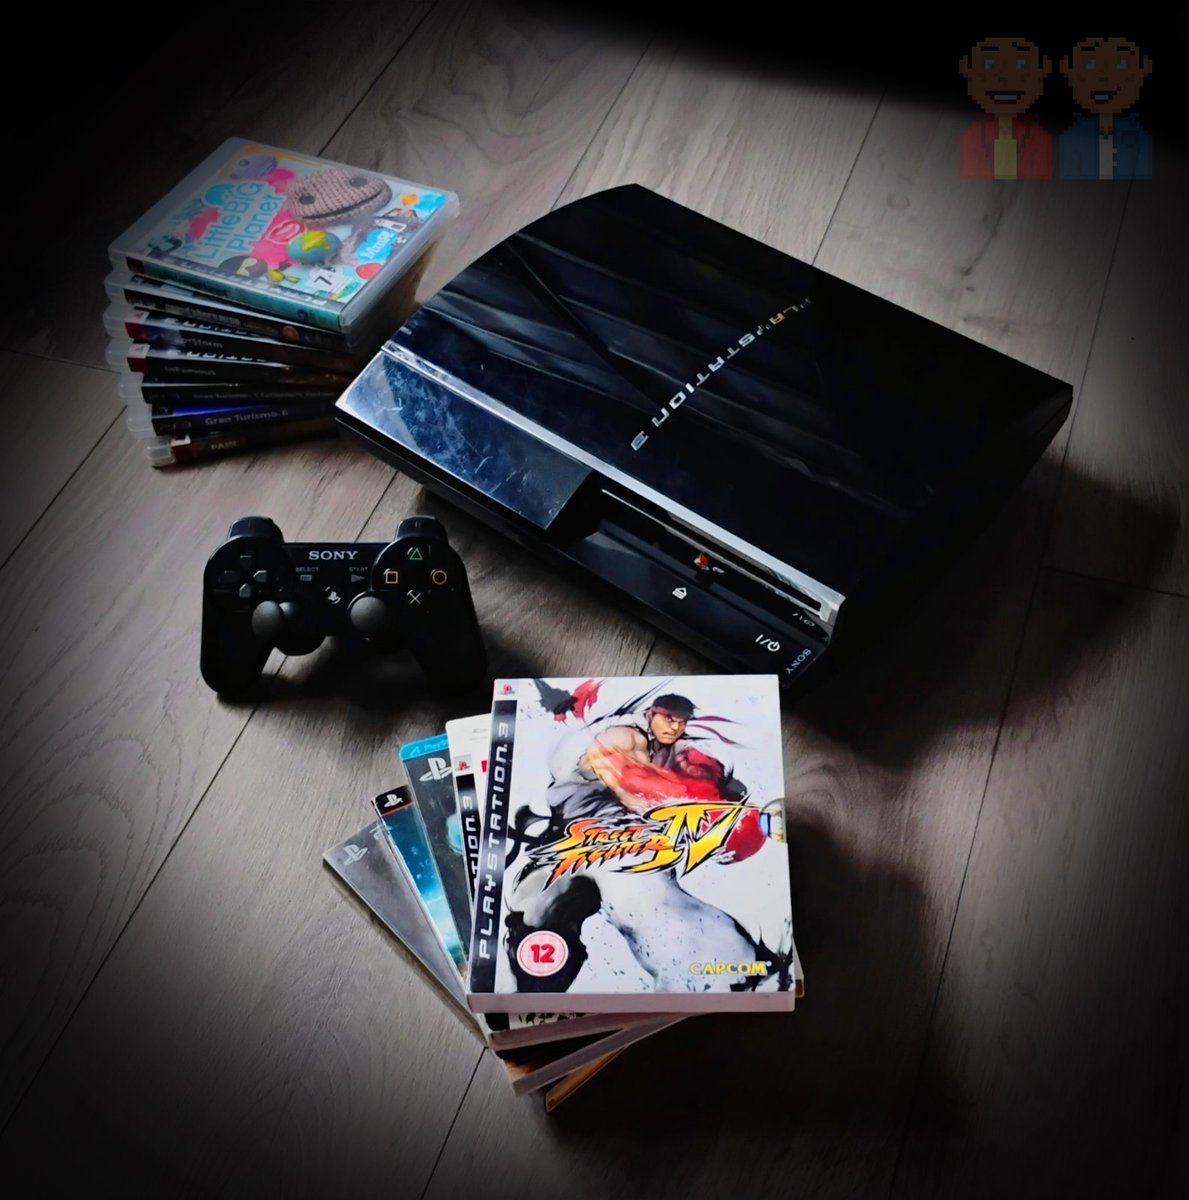 #Sony's #PlayStation 3 was 7th gens most powerful console, boasting backwards compatibility, a #blueray player & an array of useful ports with some fantastic exclusives! #PS3 was a beast, would you agree? #GamersUnite #RETROGAMING #reteogamer #retrogames #Retro